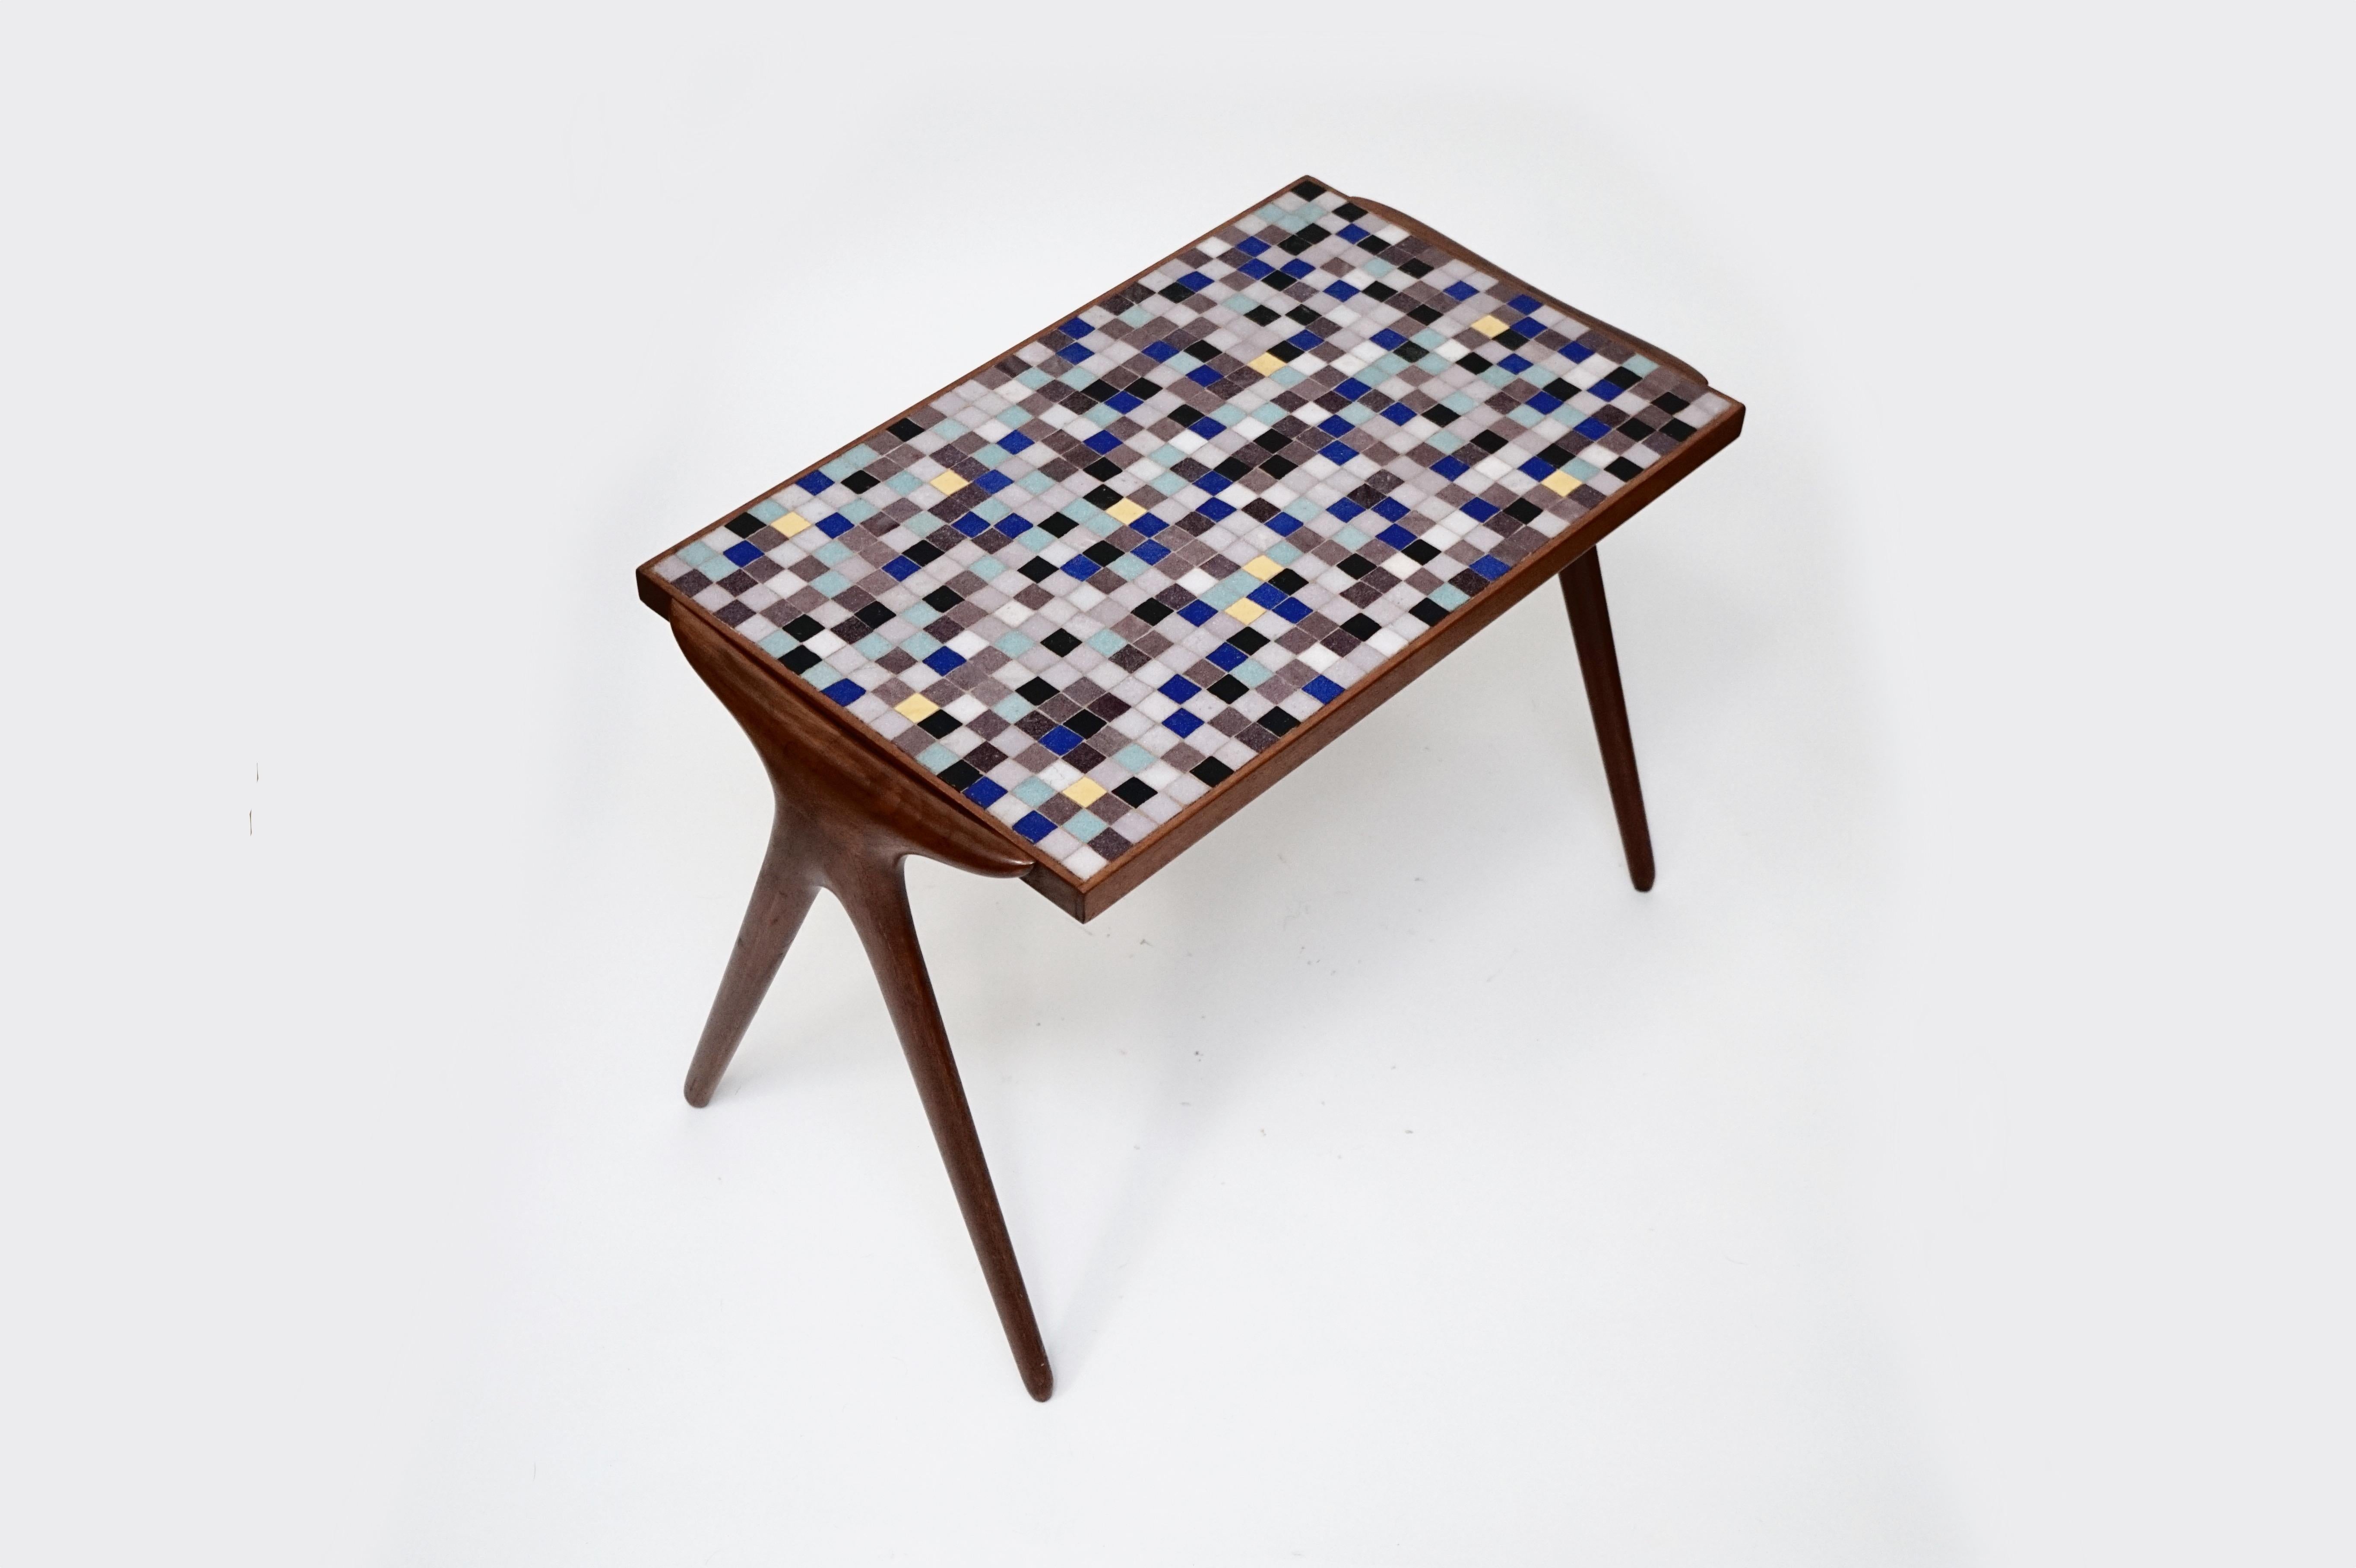 This rare gem of a side table is by Vladimir Kagan, during his early years with Hugo Dreyfuss featuring his highly-sought-after-by-collectors mosaic tiles on the table top and sculpted walnut frame for the table's body and legs. Produced in small